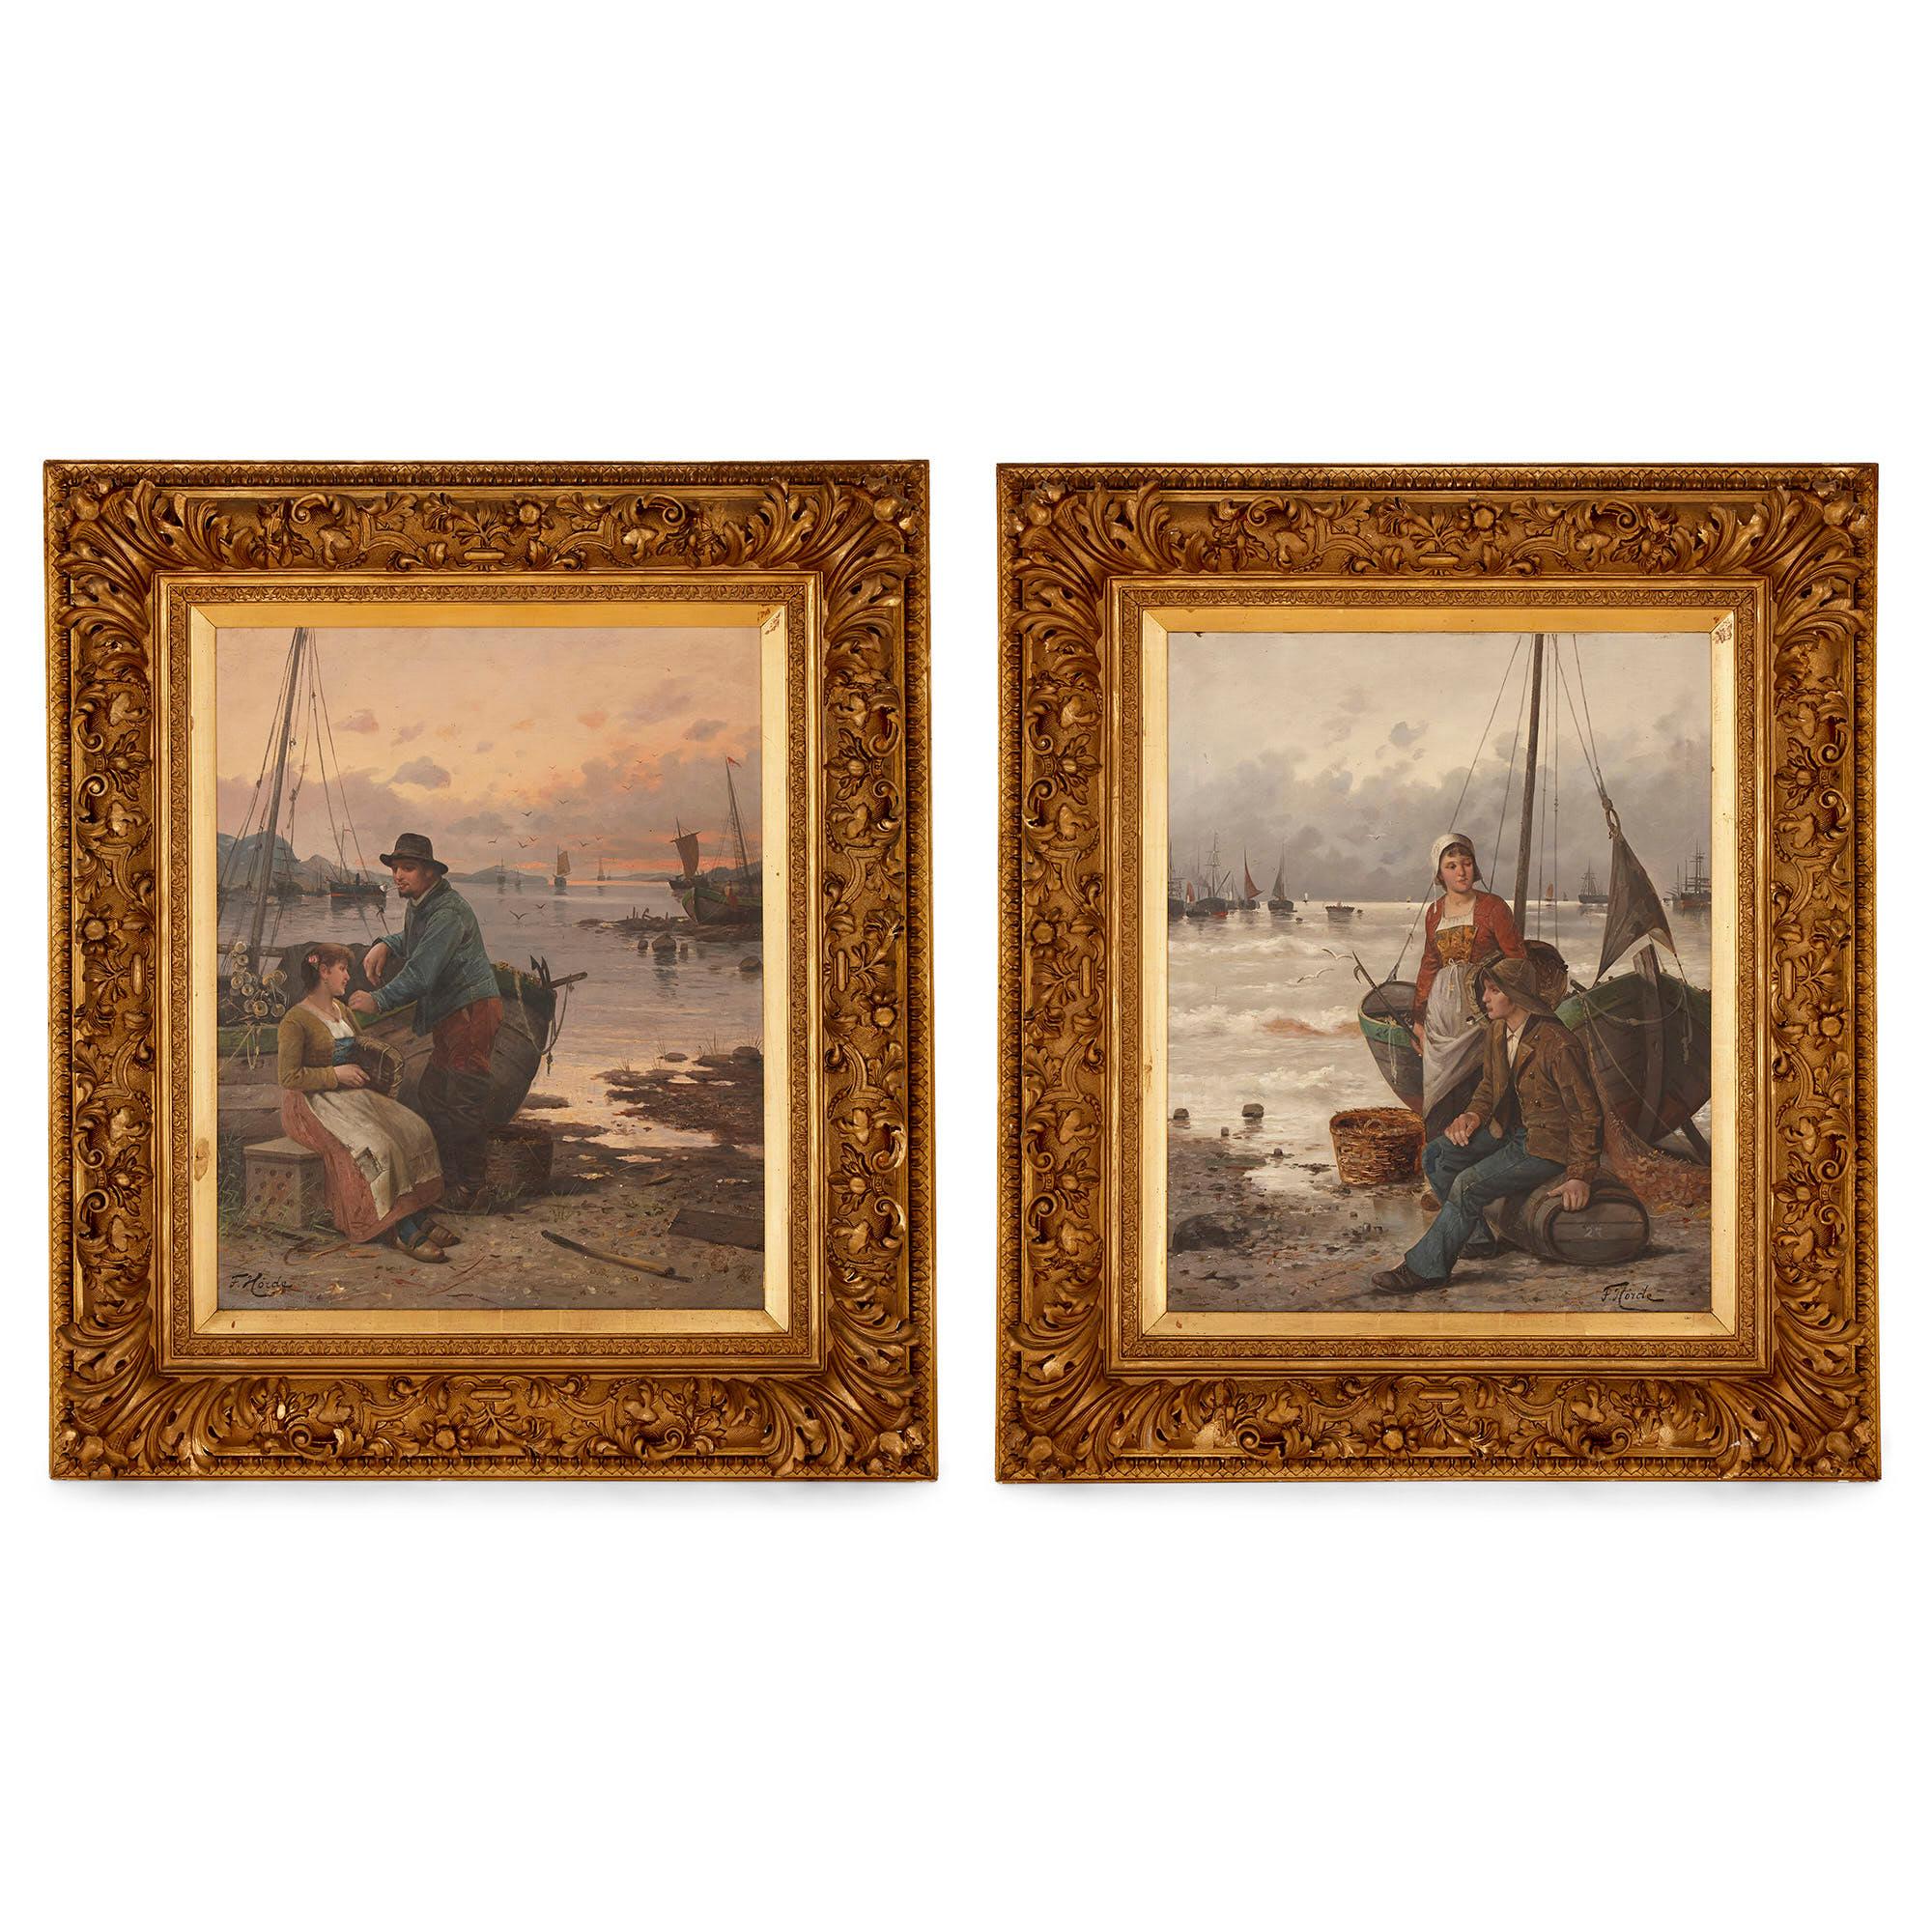 This fine pair of oil paintings depicts two views of a beachside harbour, each view centred about the genre scene of a fisherman with his wife. In the first painting, a fisherman sits on a barrel smoking while his wife stands behind him. The sea